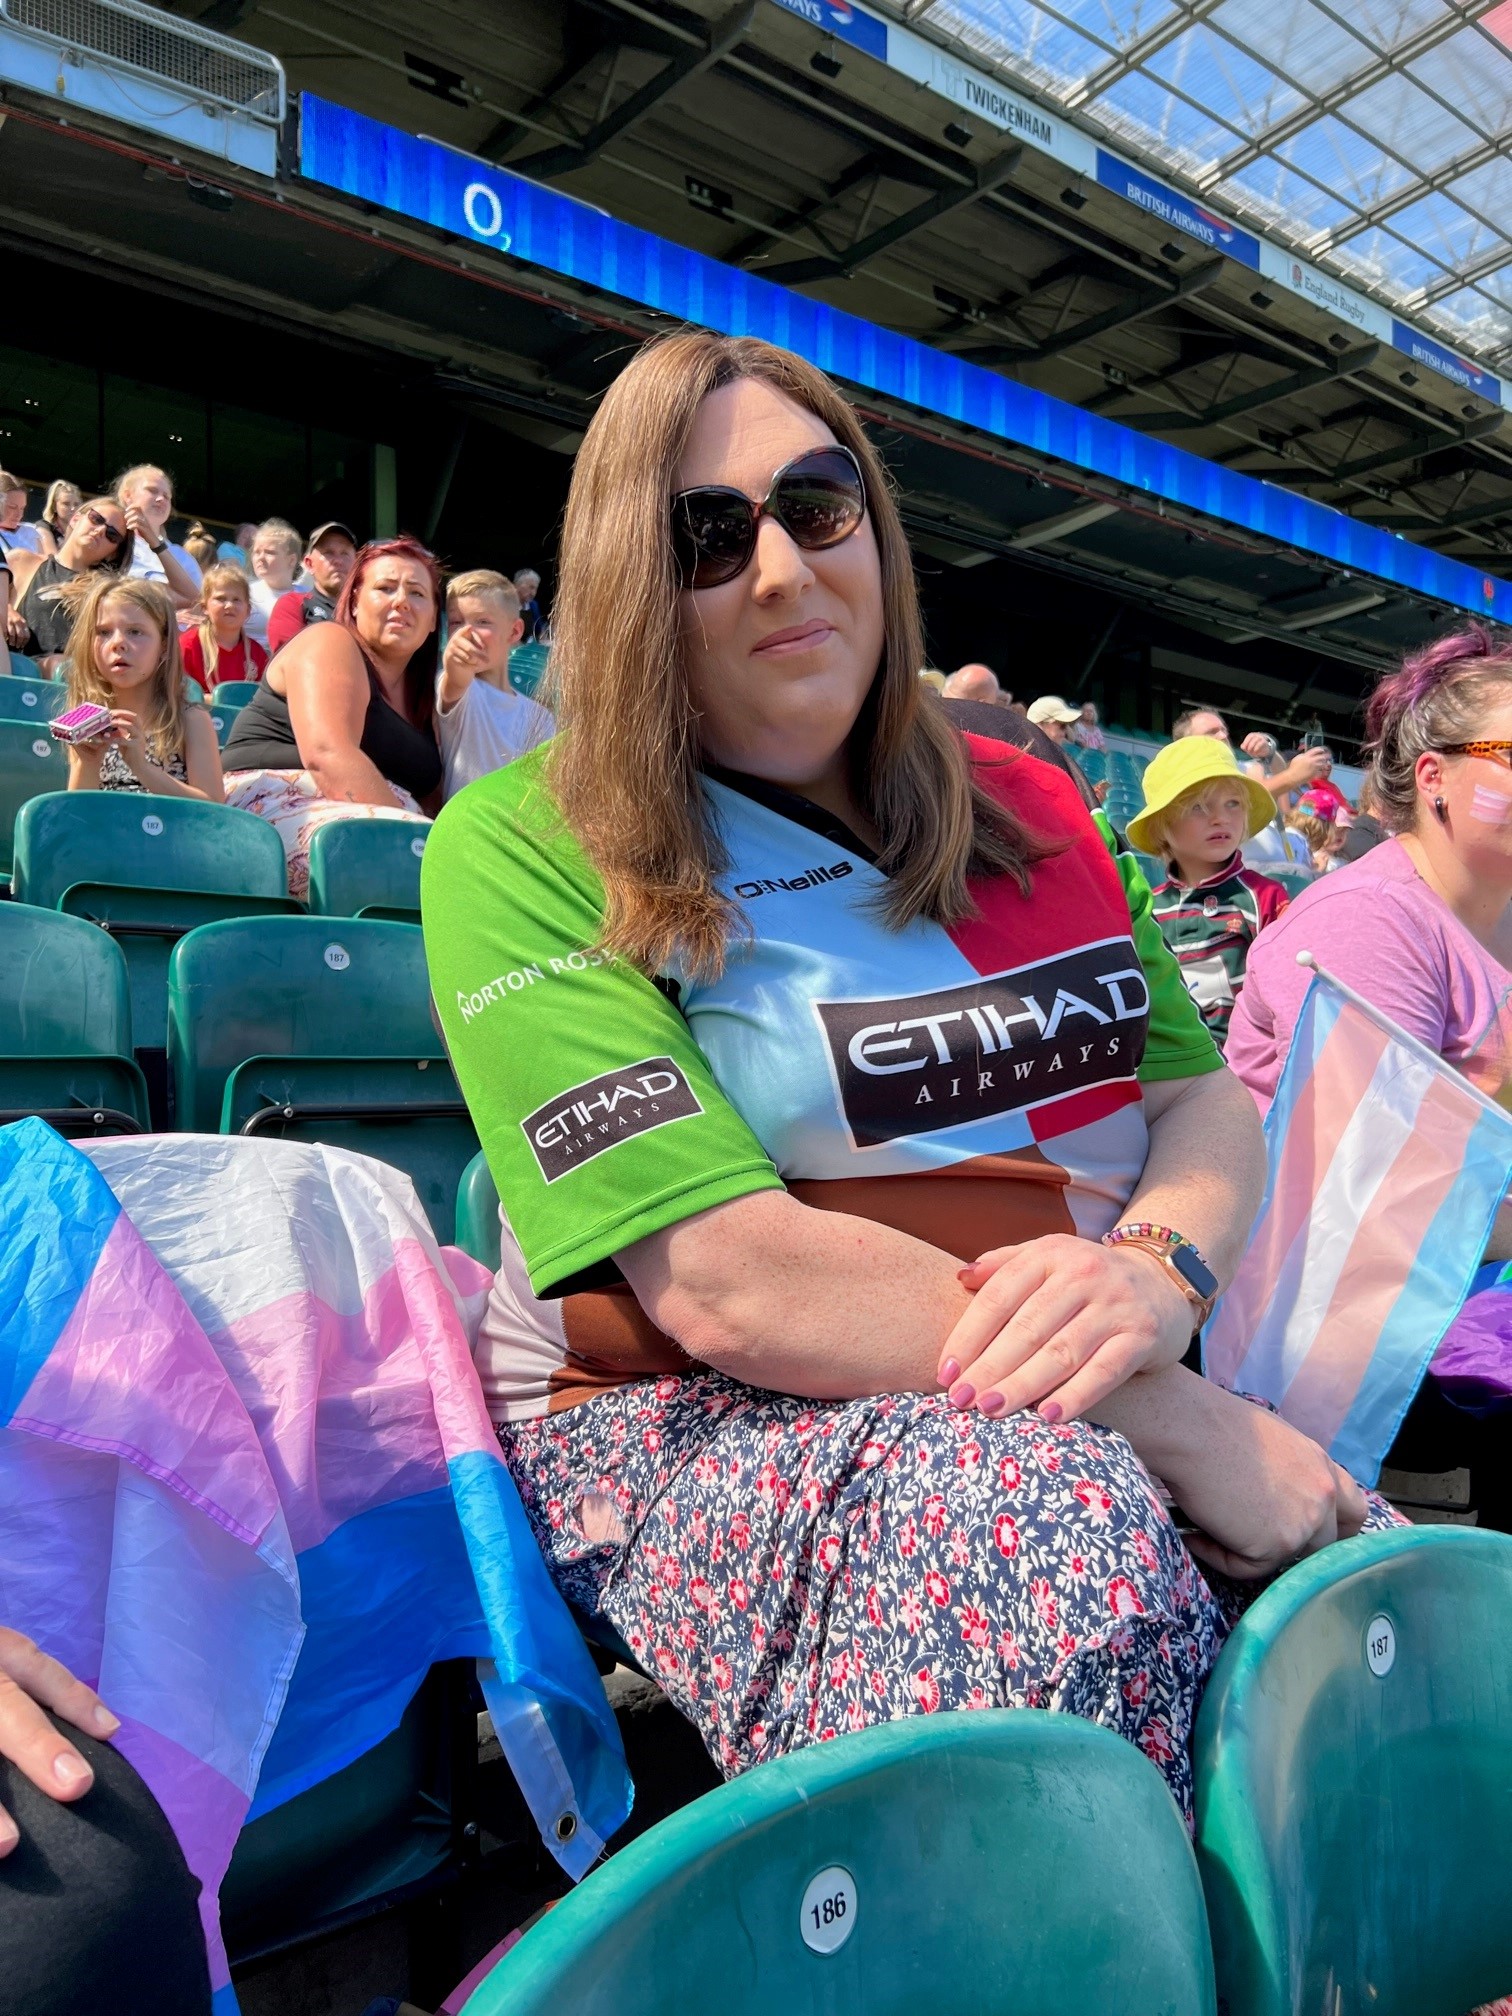 Emily Hamilton, founding co-chair of Quins Pride, says transgender women feel unwelcome in the sport